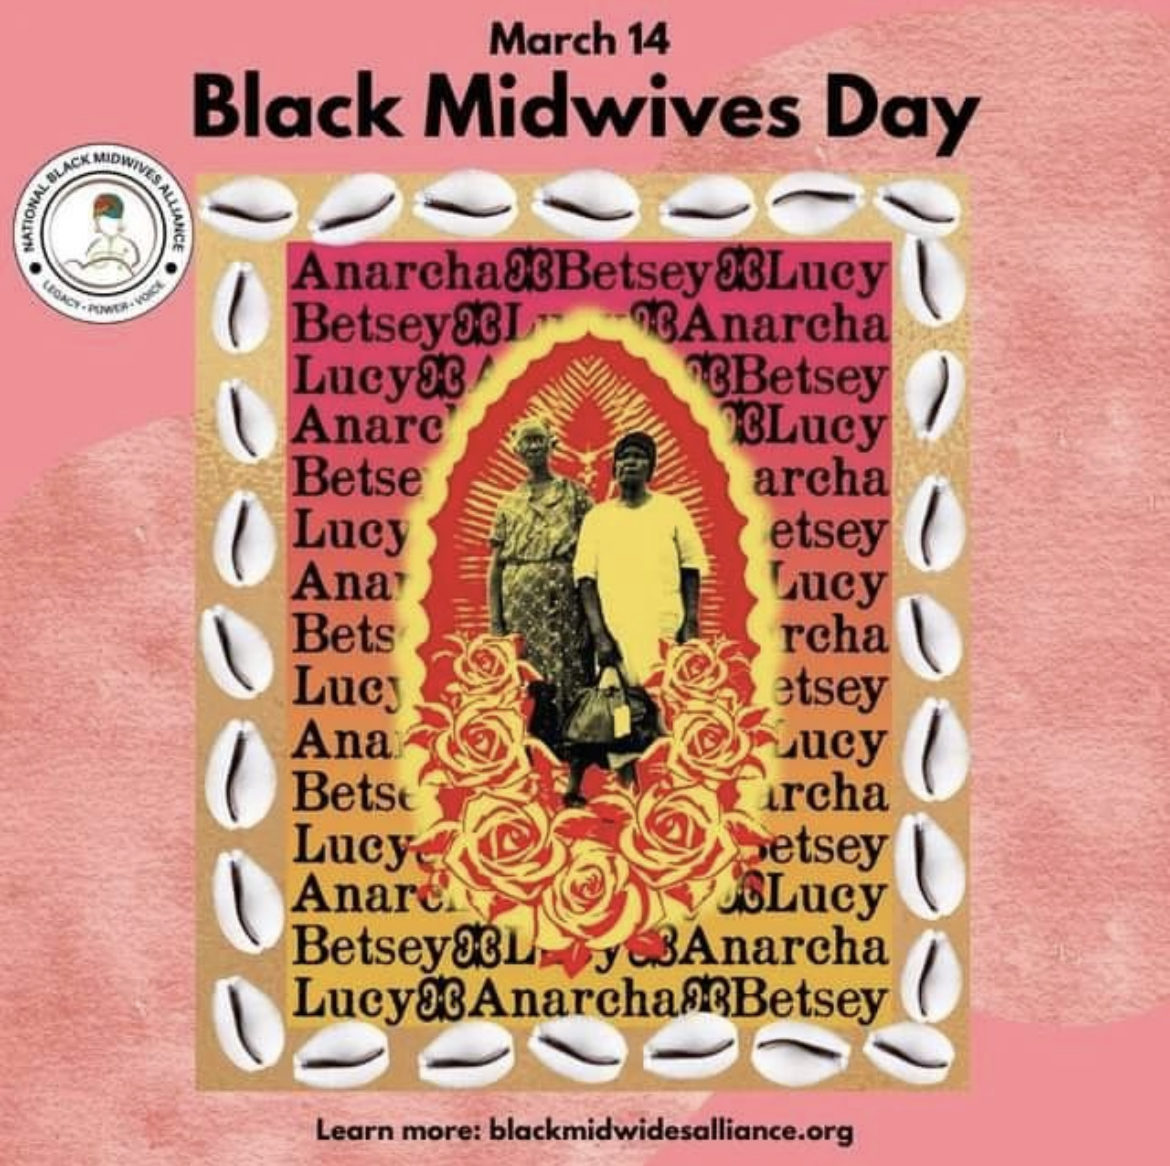 Black Midwives Day